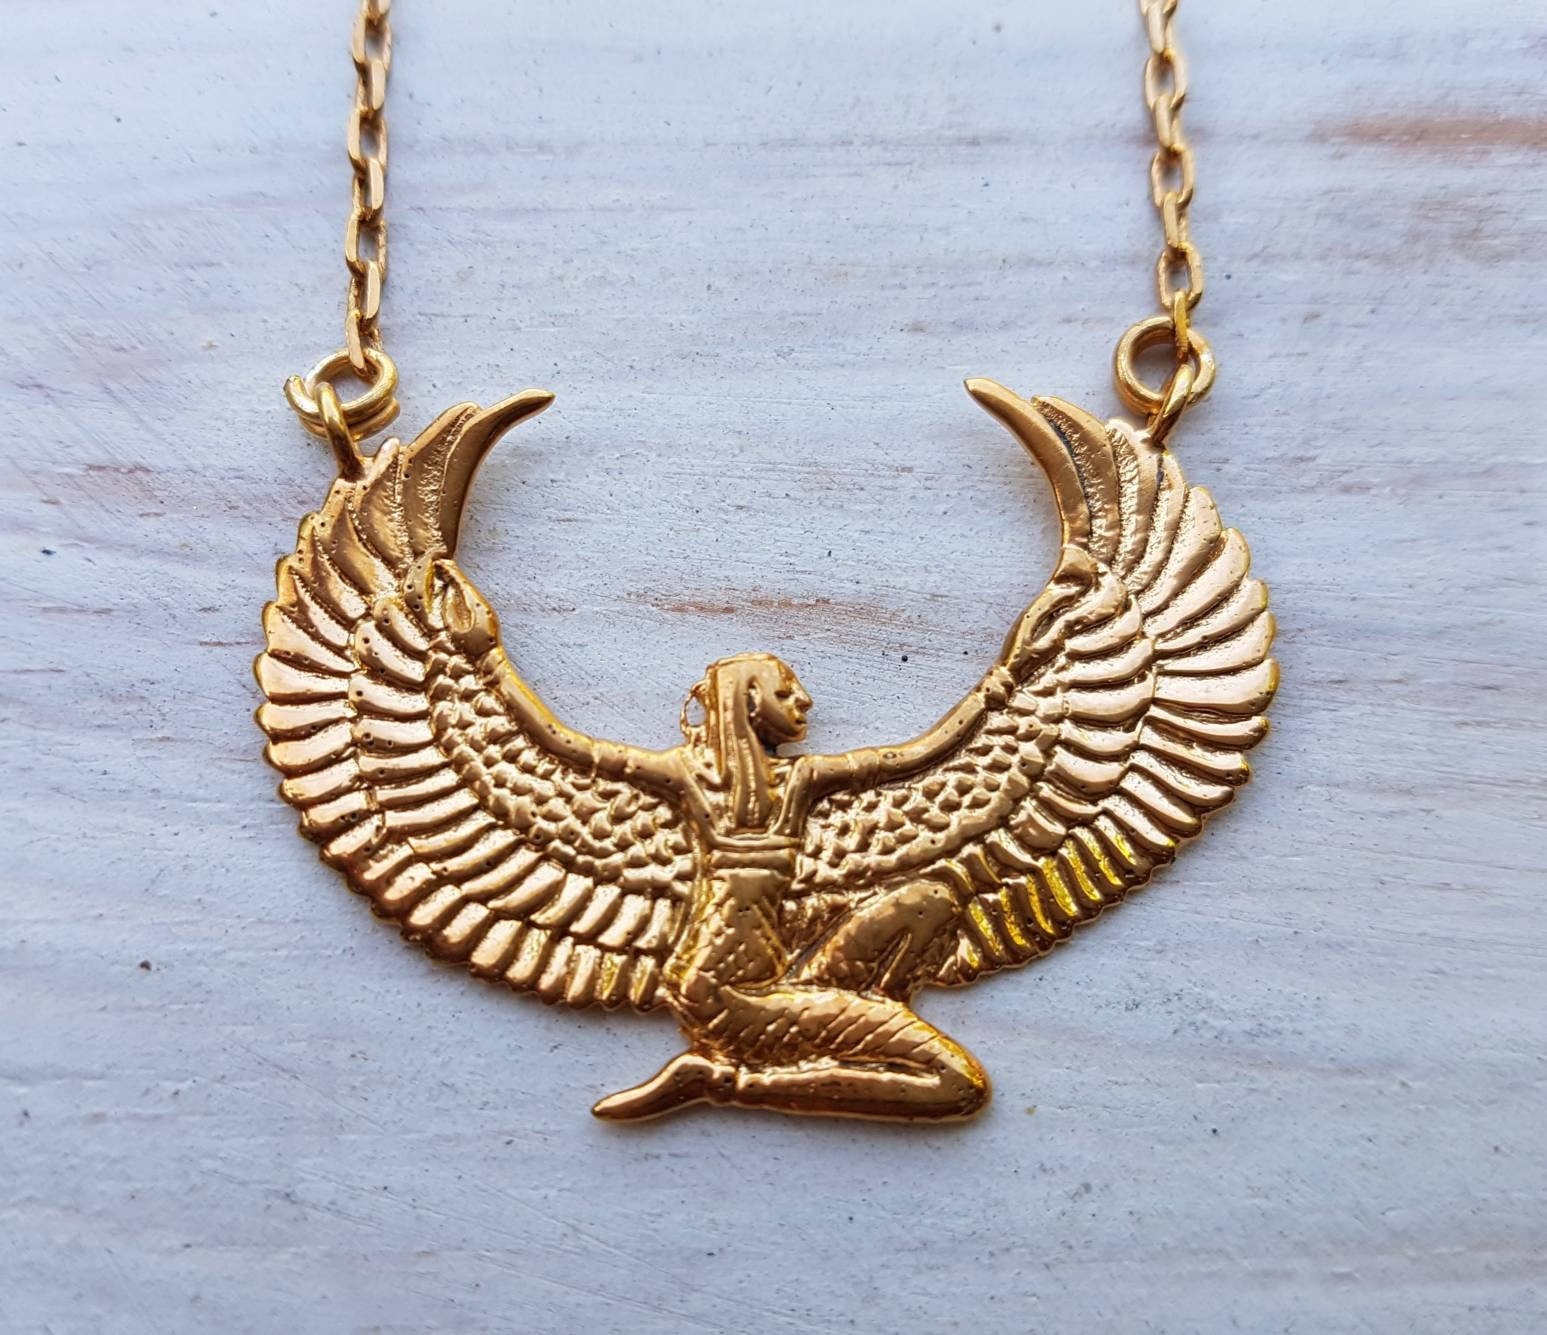 Gold Dipped Auset Ma'at Egyptian Goddess Isis Necklace - Small